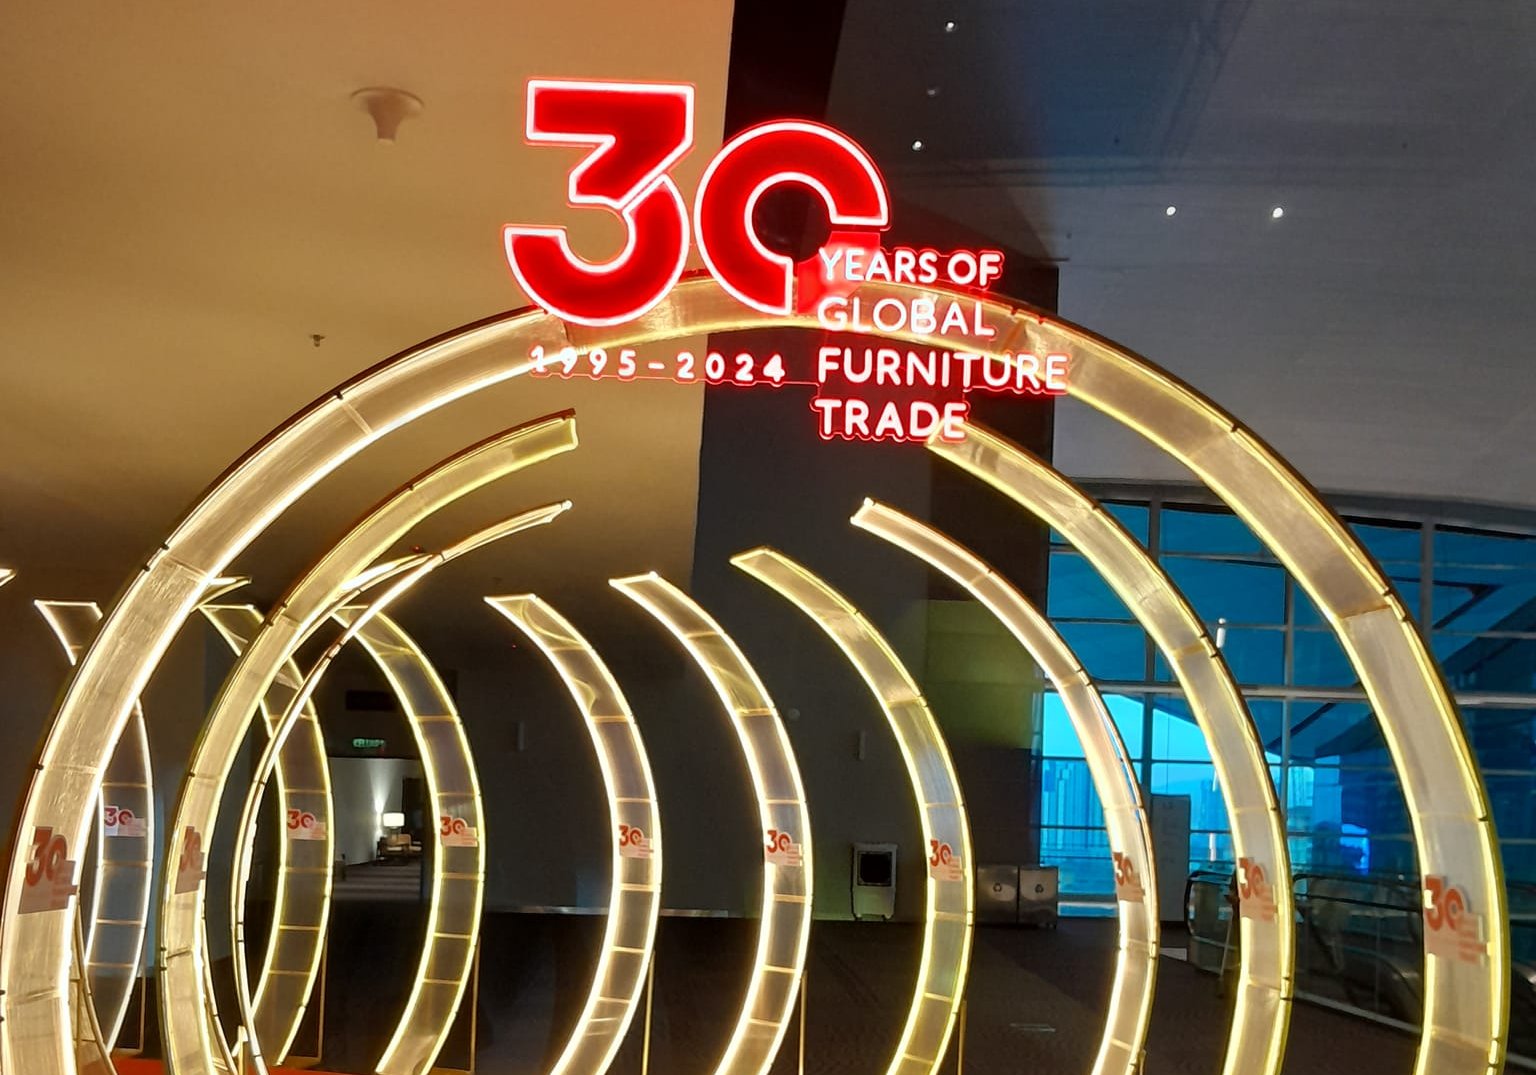 The Malaysian International Furniture Fair (MIFF) kicked off its 30th year anniversary with an impressive display of global participation, boasting a record-breaking 714 exhibitors from 15 countries and regions. 